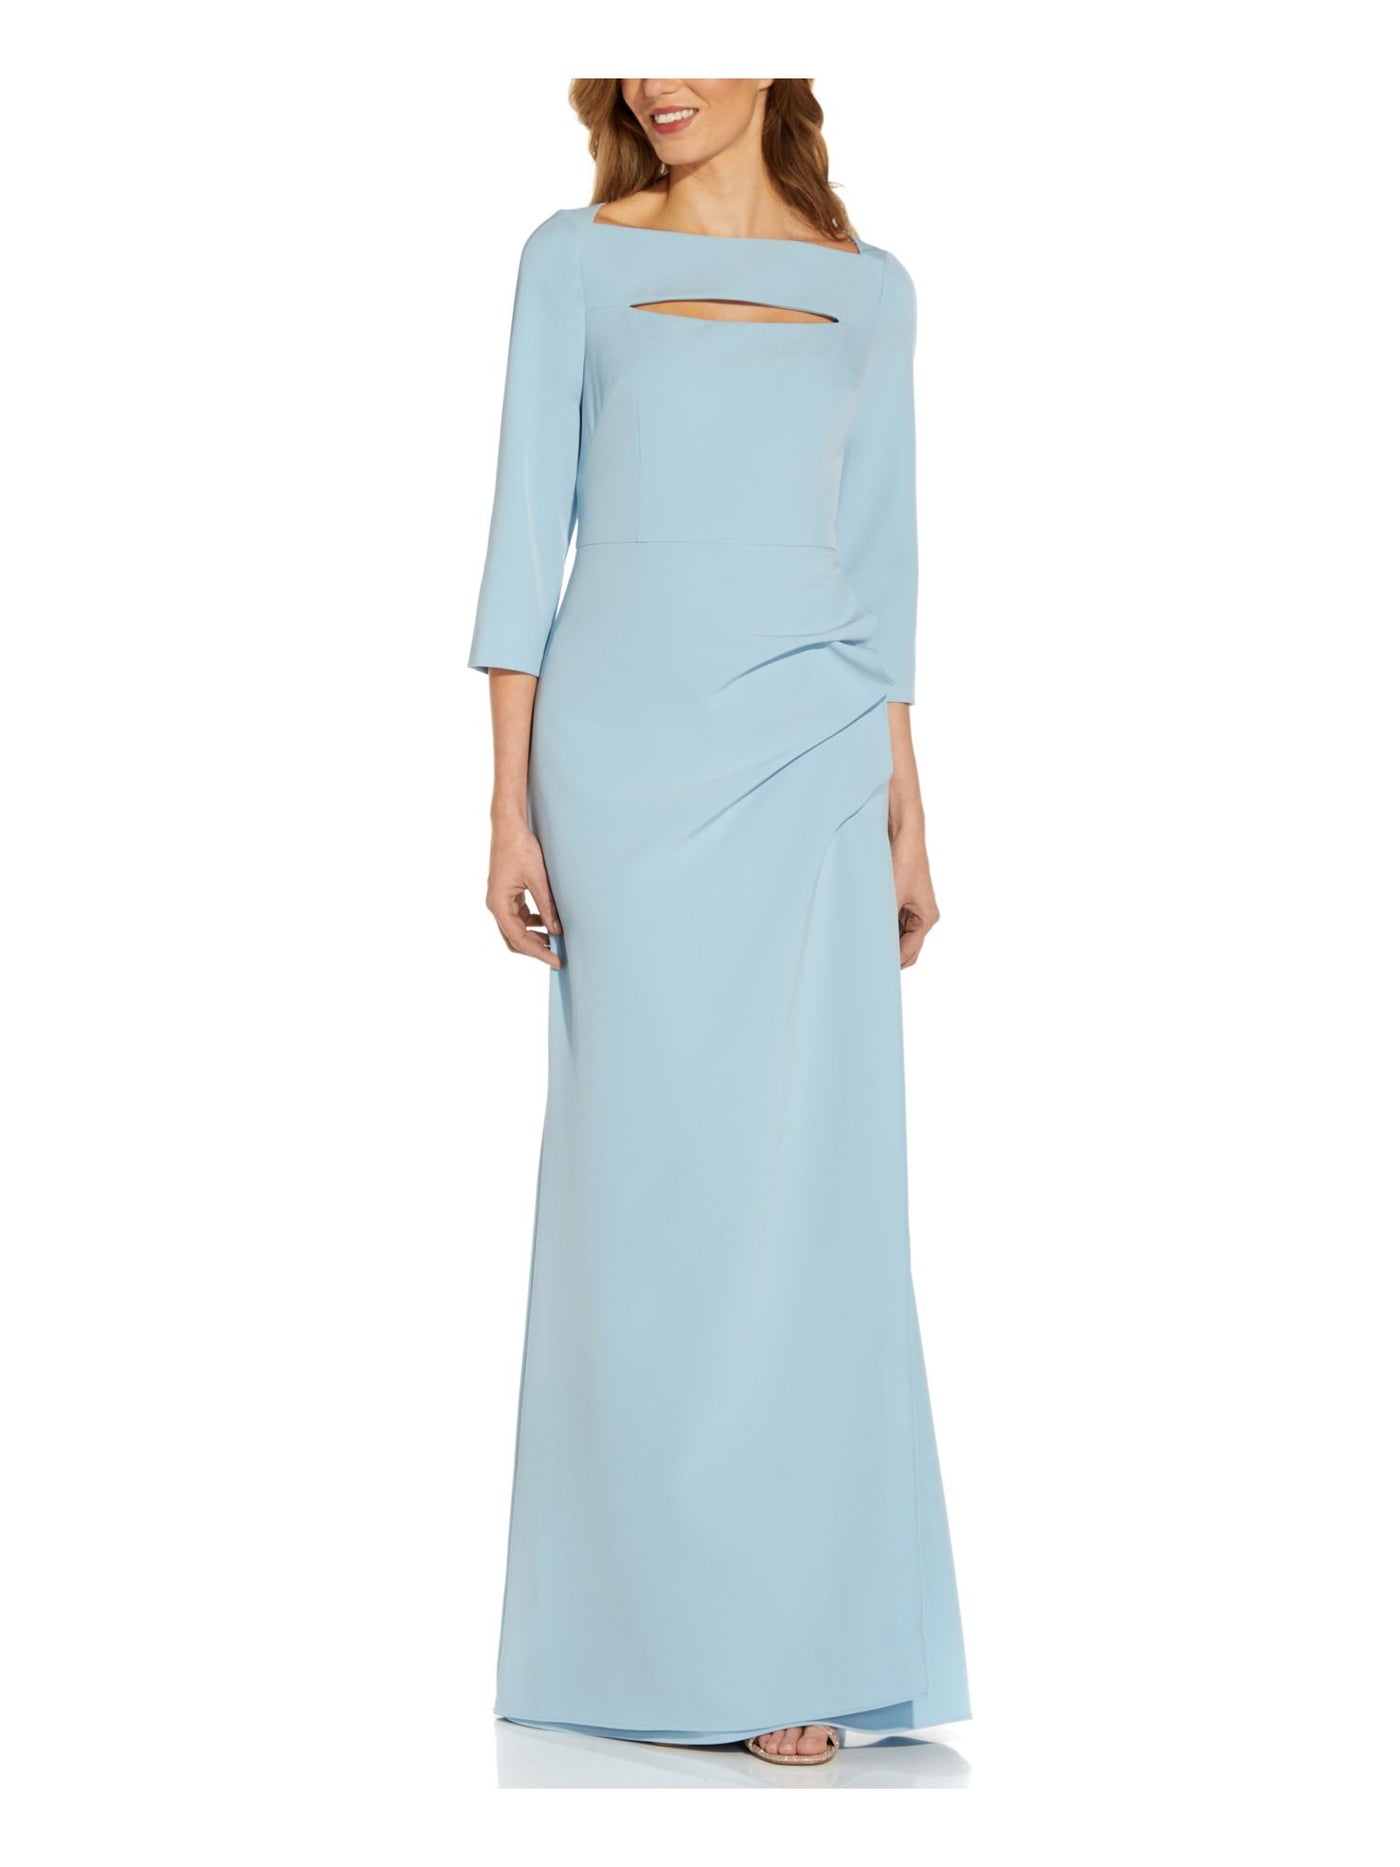 ADRIANNA PAPELL Womens Light Blue Stretch Cut Out Zippered Pleated 3/4 Sleeve Boat Neck Full-Length Formal Gown Dress 10